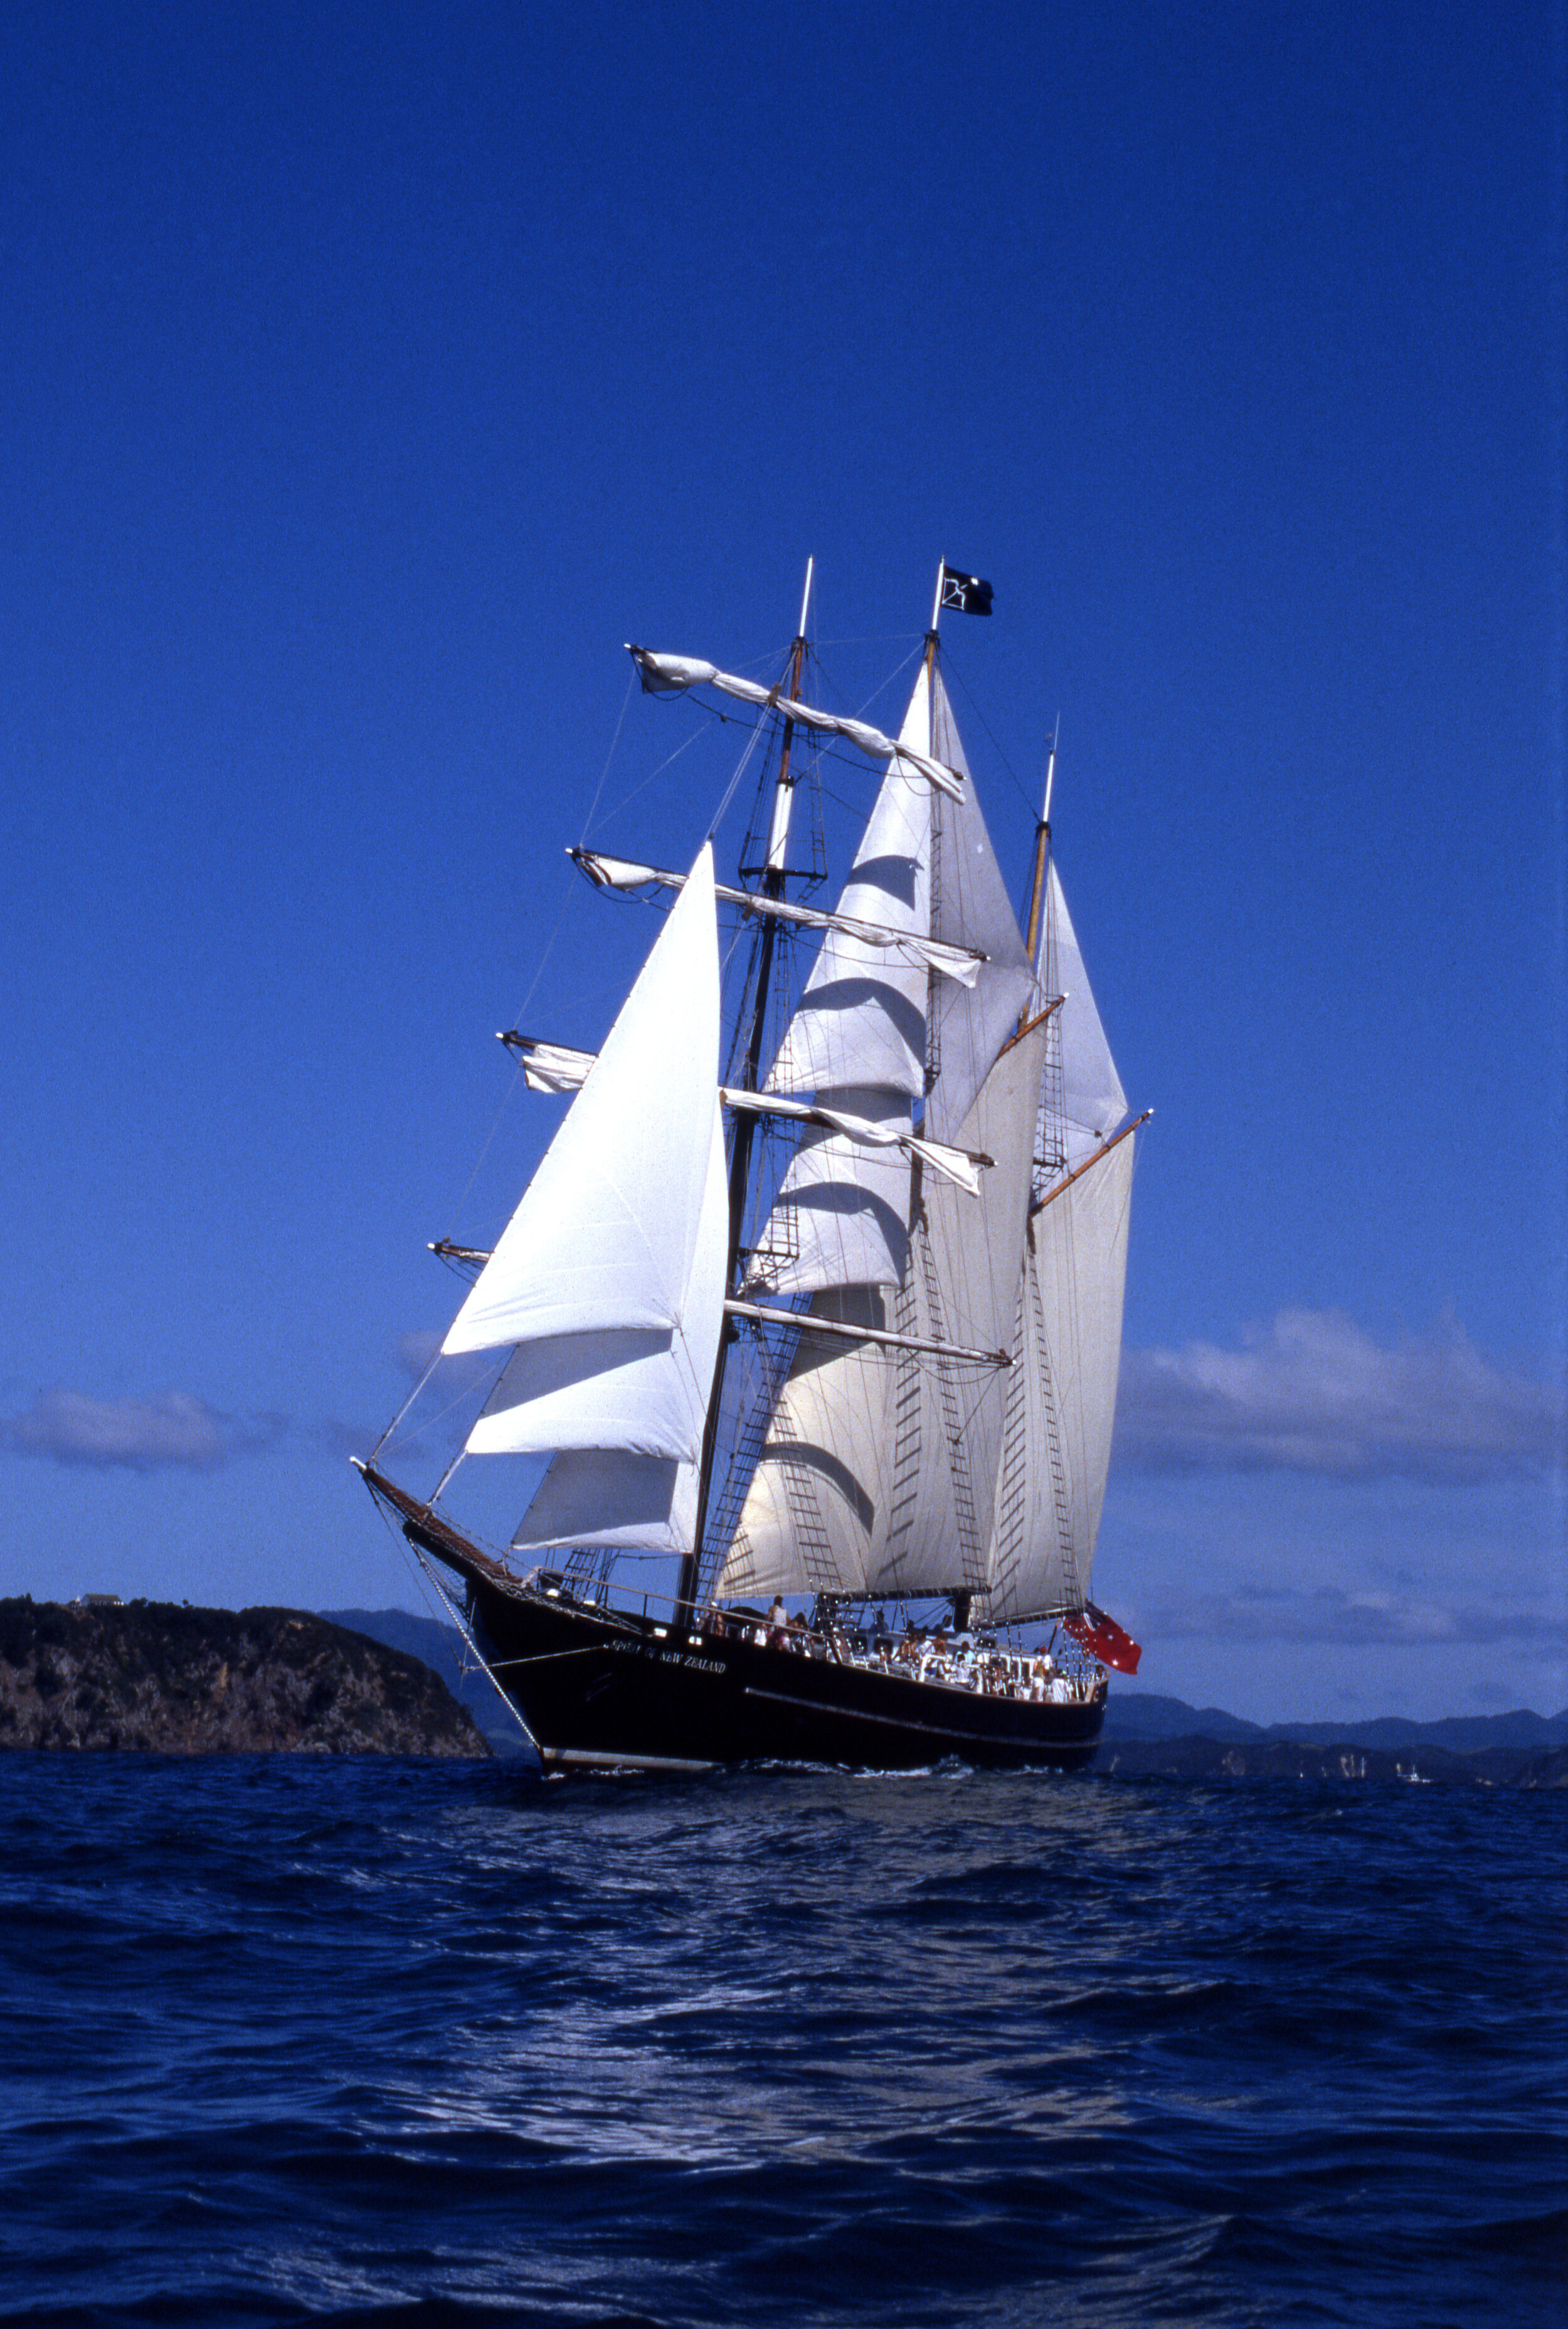 Bay Of Islands, New Zealand and the sail training ship, "Spirit of New Zealand".